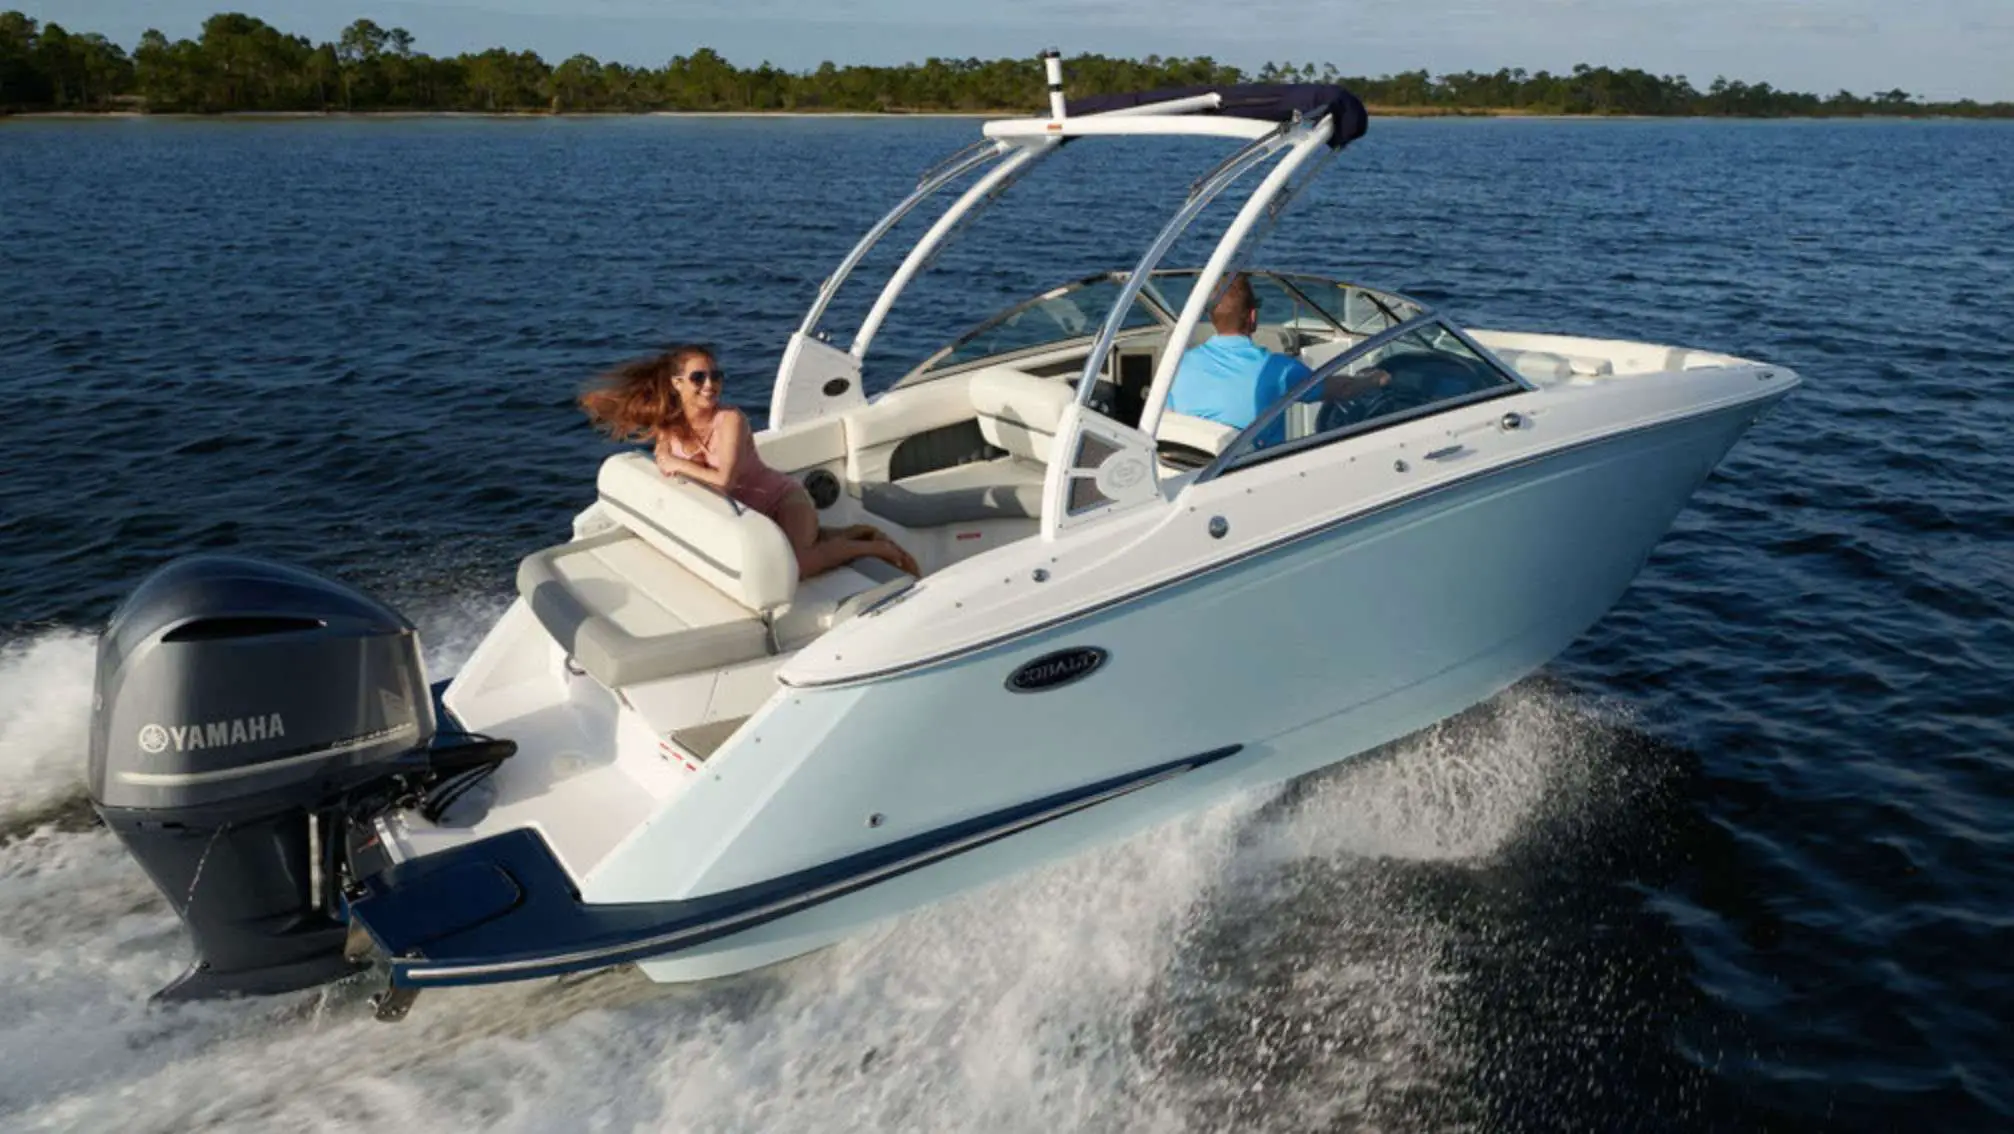 The Best Family Boat: A Guide To Help You Buy The Perfect ...